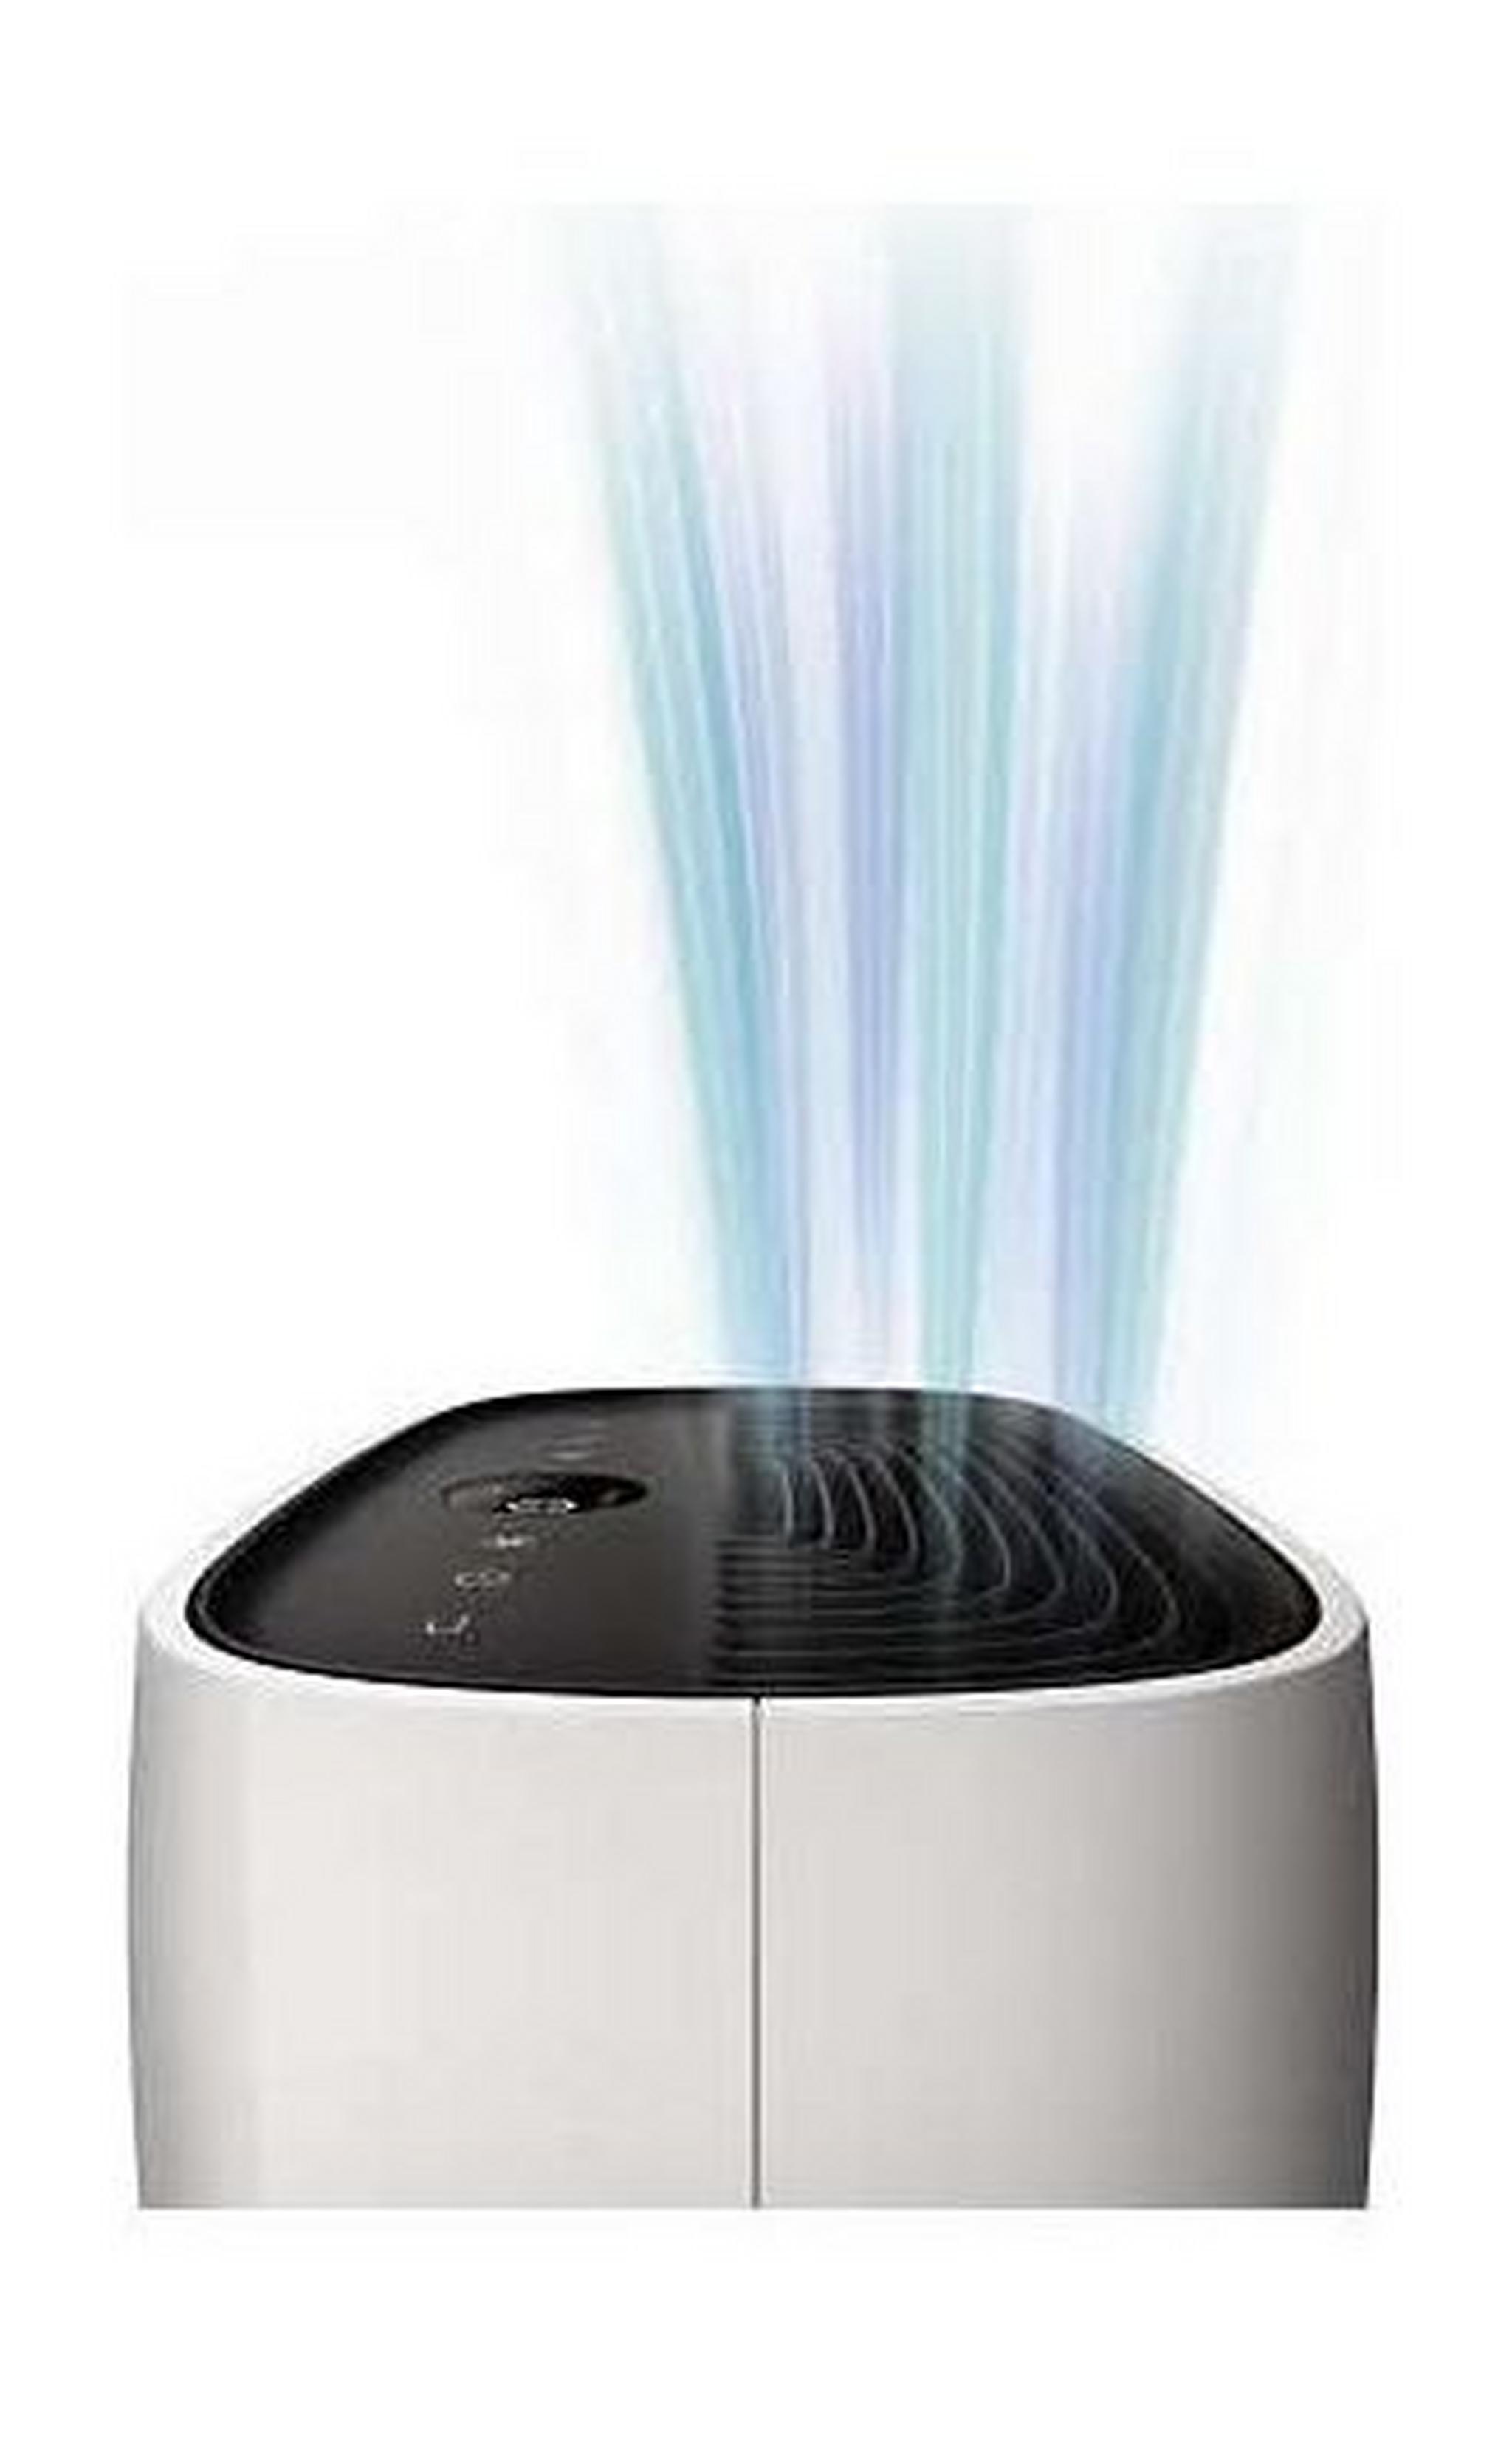 Philips Comfort Air Cleaner Purifier (AC2887/30) – White